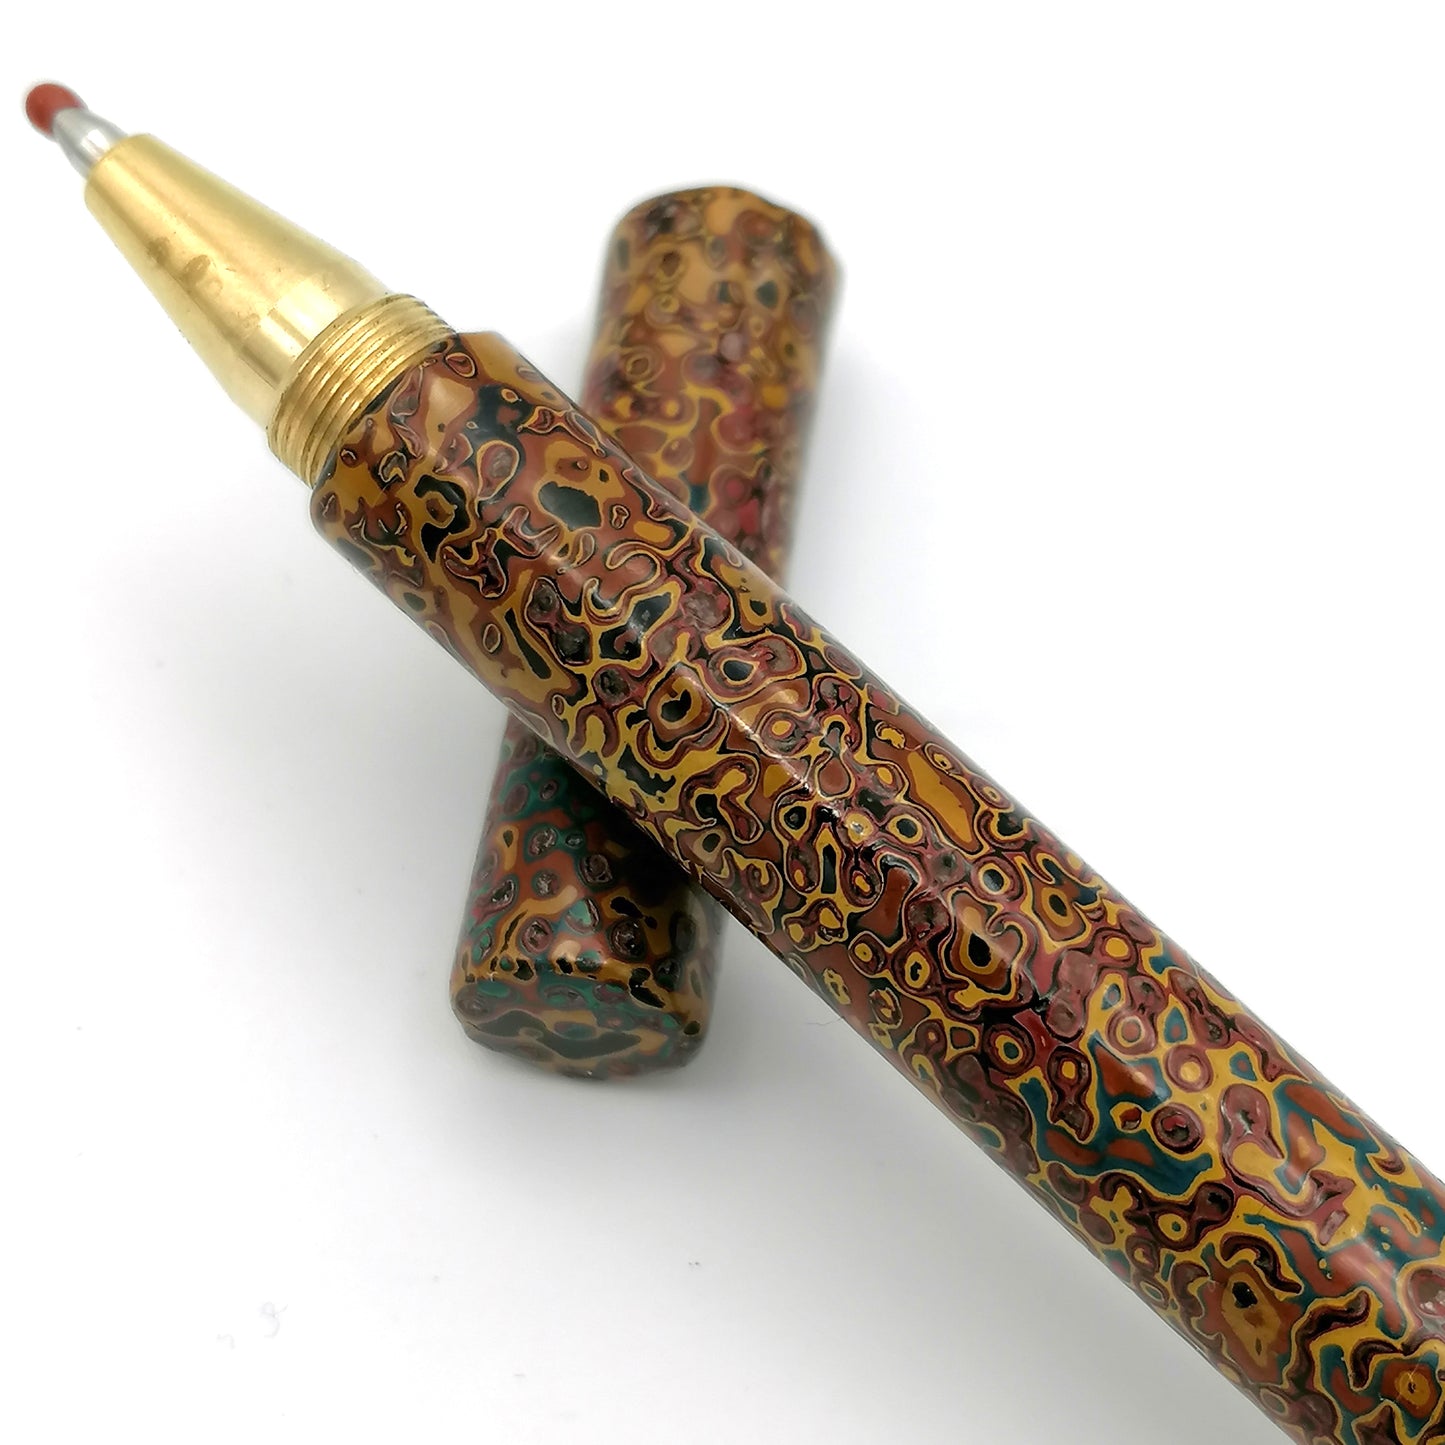 Nanako-Nuri Solid Brass Pen in oranges reds blues and yellows